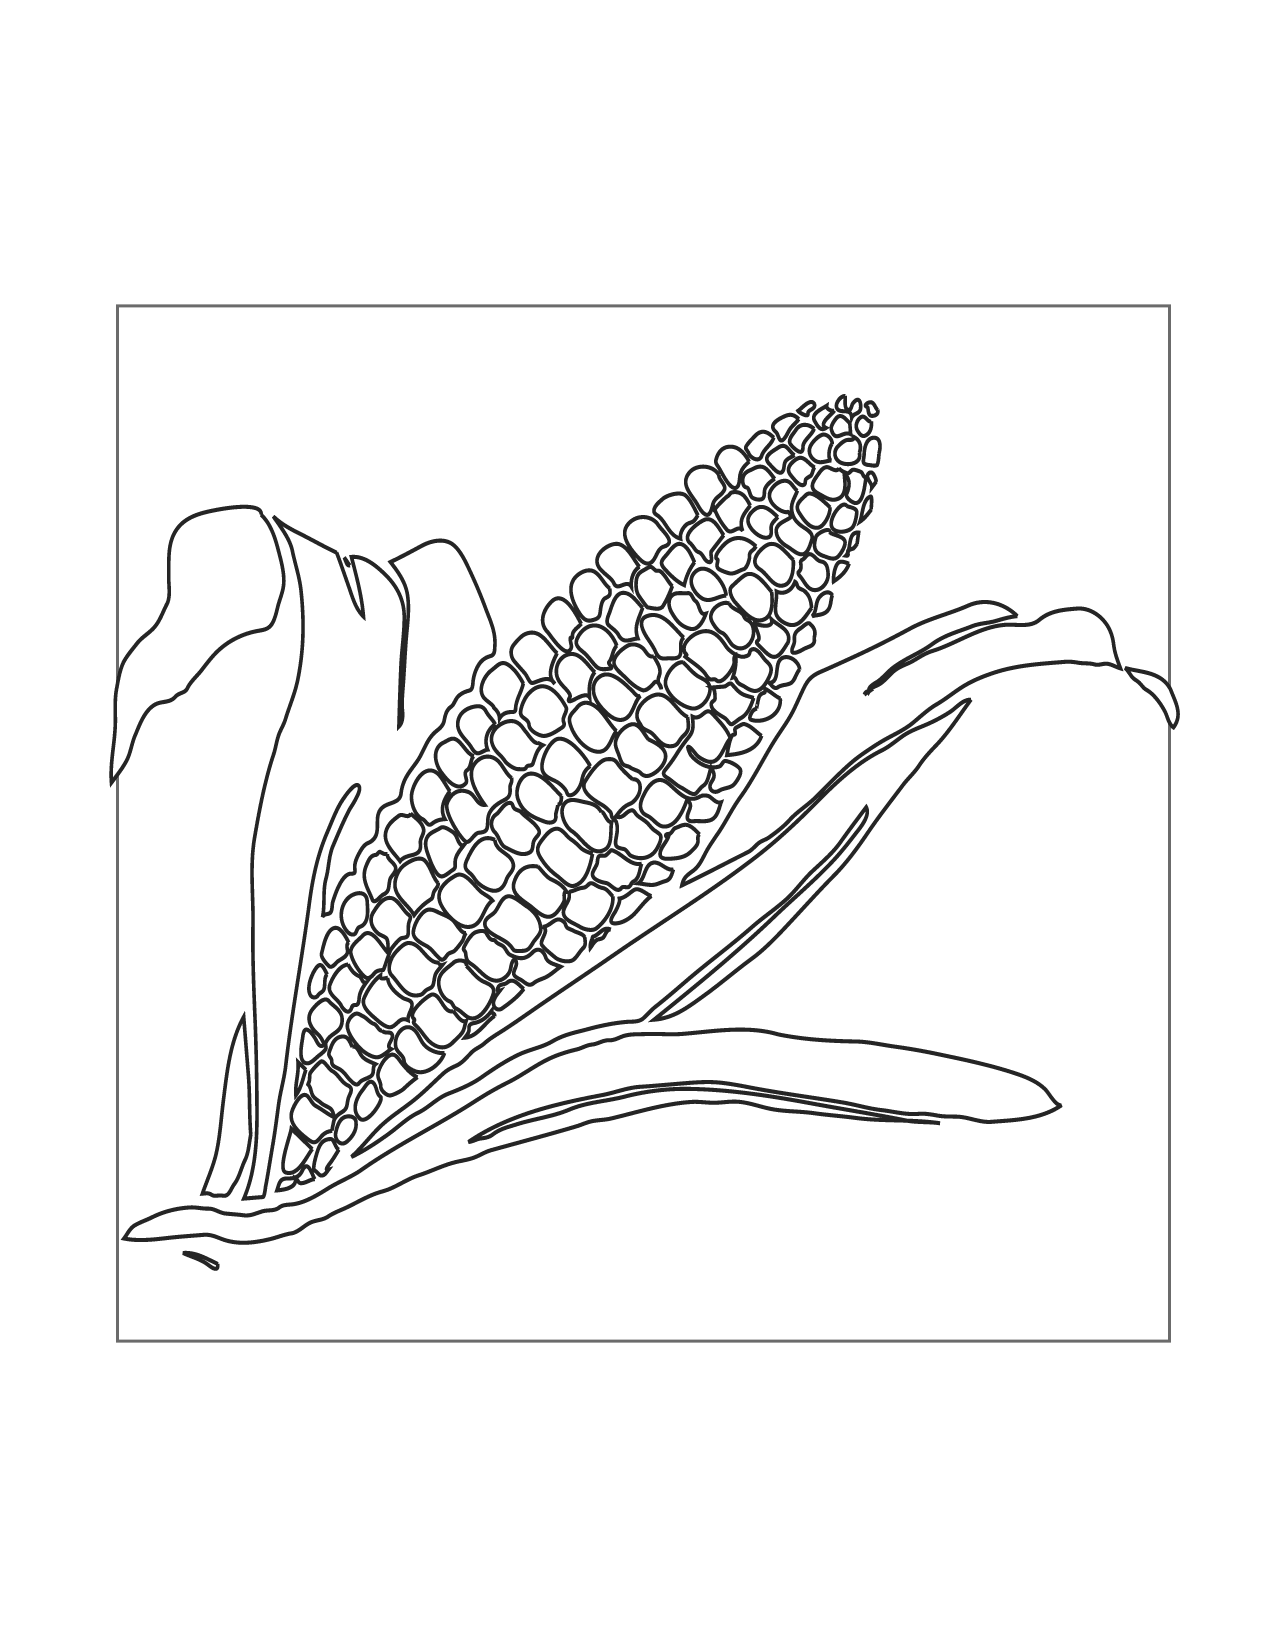 Ear Of Corn Coloring Page